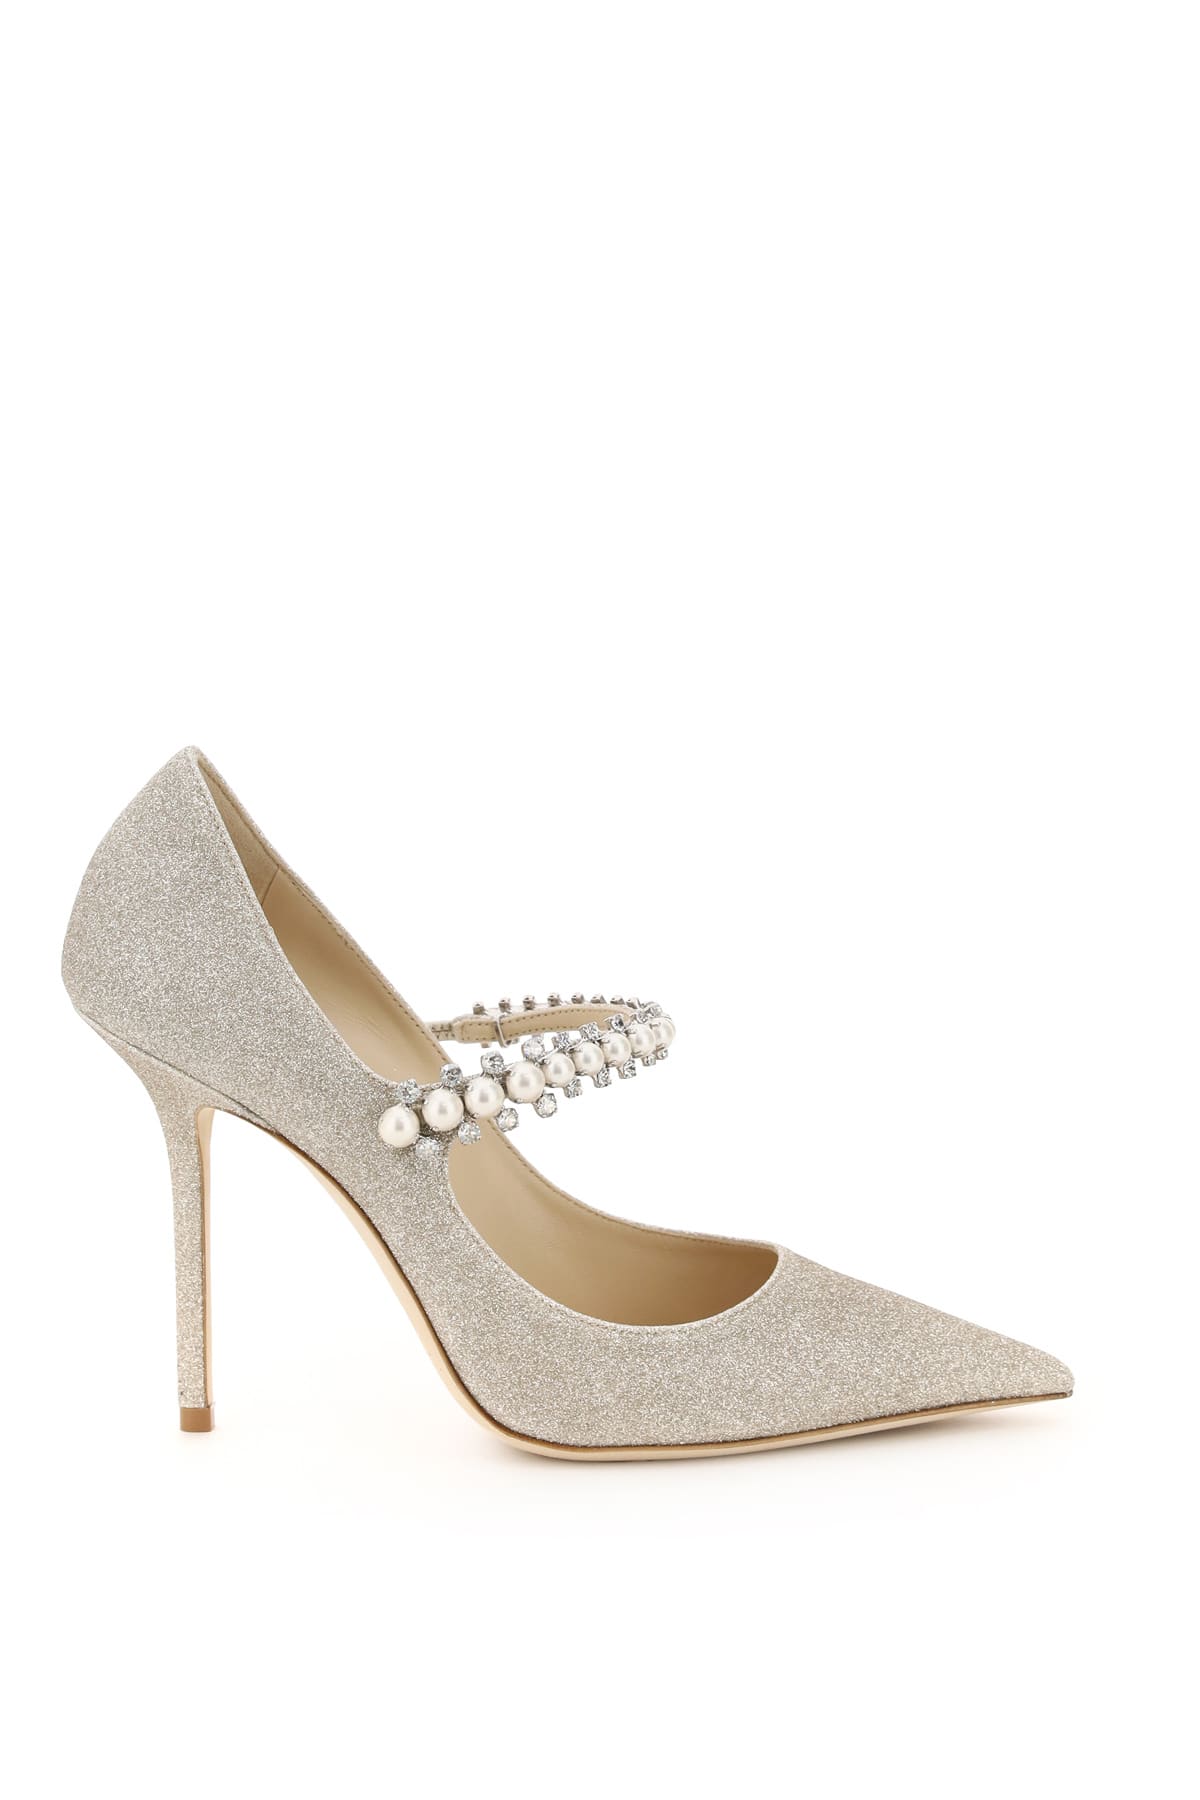 Jimmy Choo Baily Glitter Pumps With Crystals